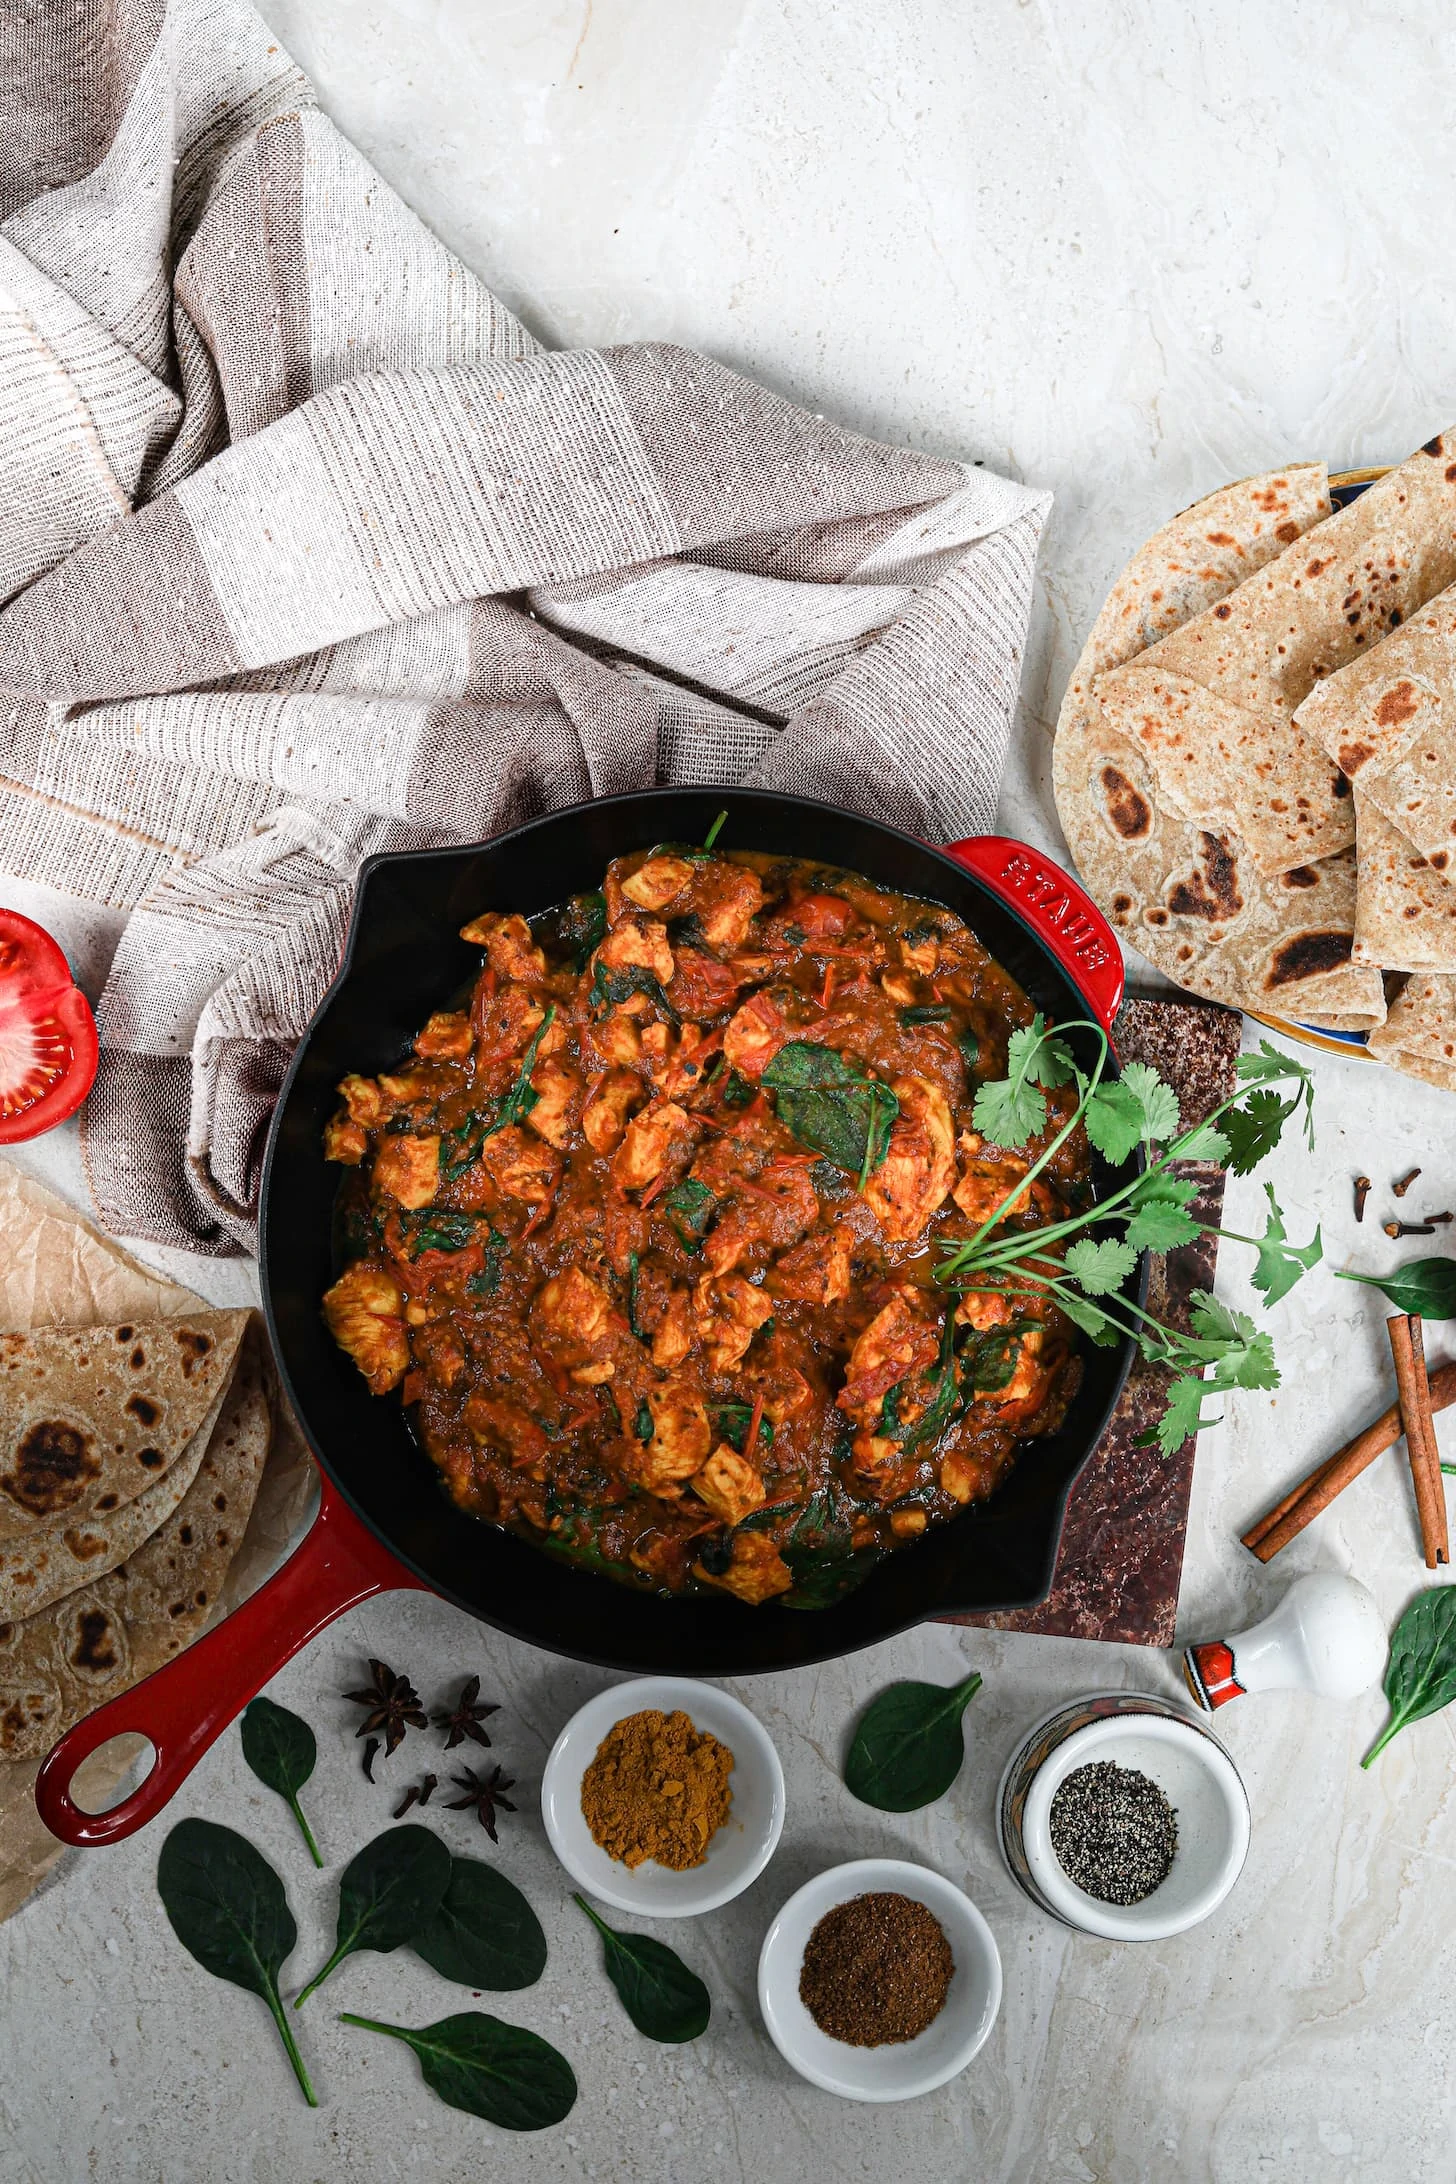 a red pan of chicken curry surrounded by roti (traditional Indian flatbread) and ramekins of spices.